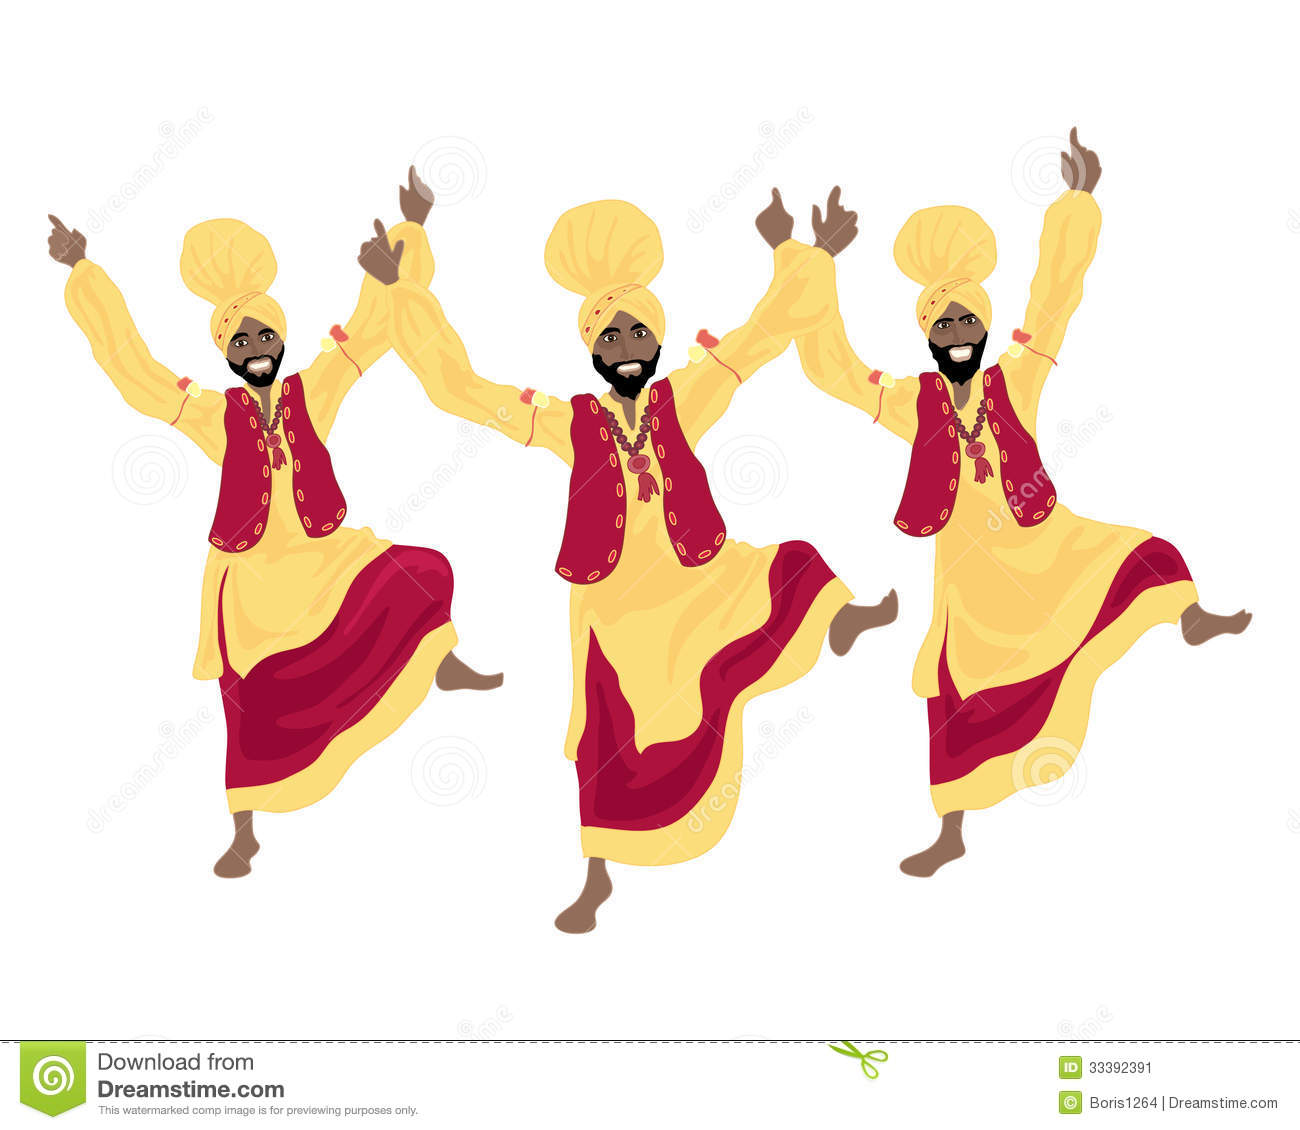     Dance In Colorful Red And Yellow Traditional Dress On A White